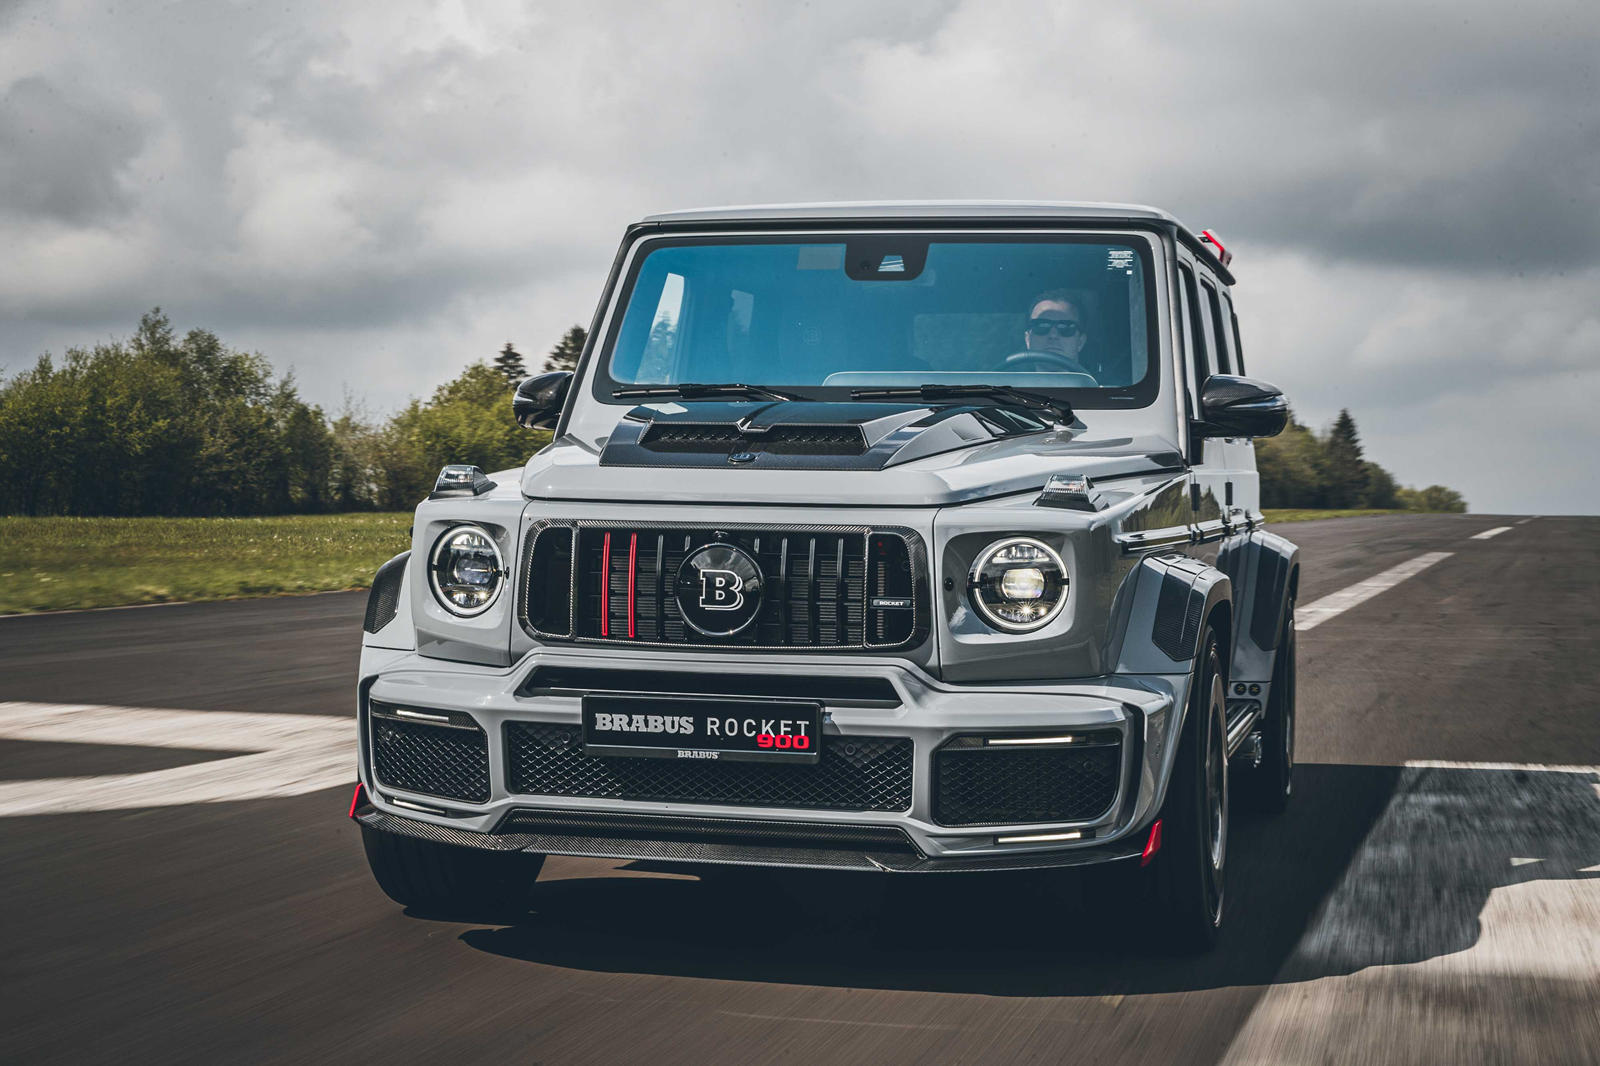 Brabus 900 Rocket Is The Most Extreme MercedesAMG G63 Ever Made CarBuzz